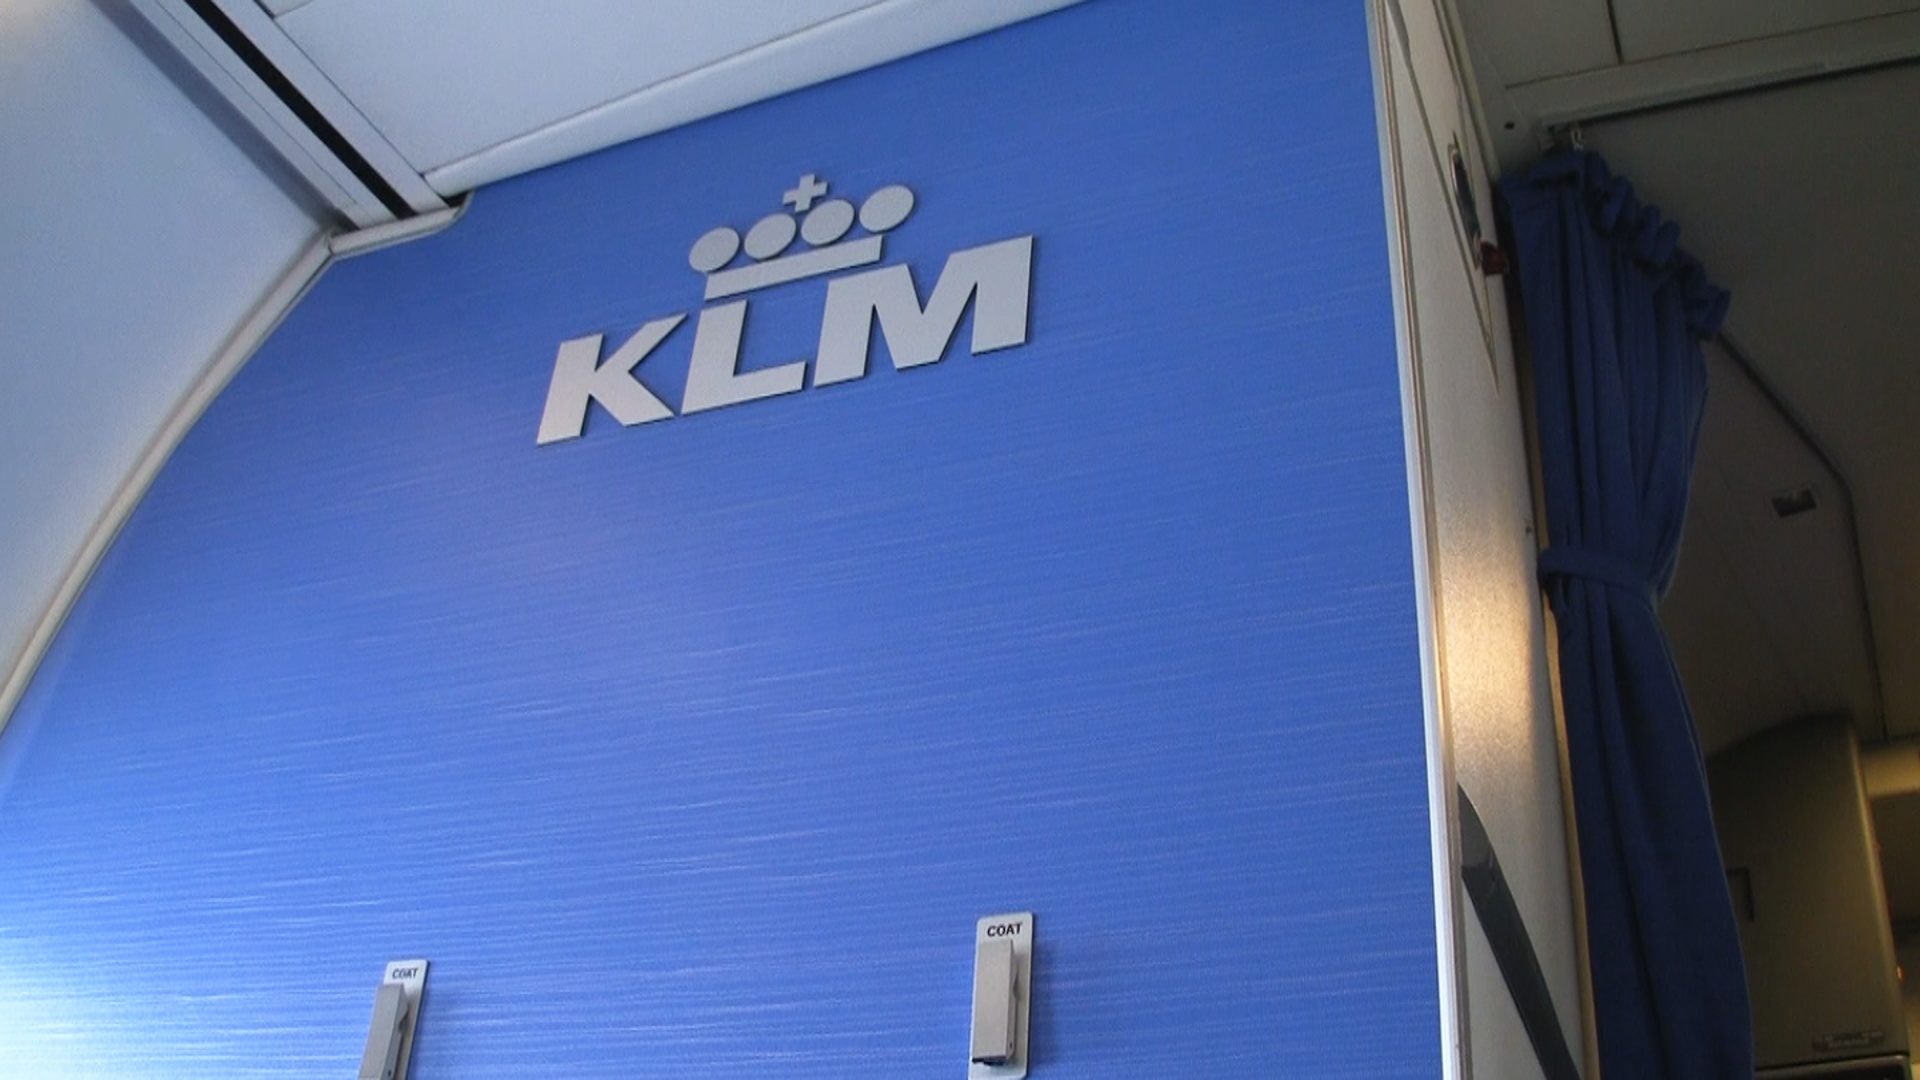 KLM Business Class with logo on bulkhead wall.